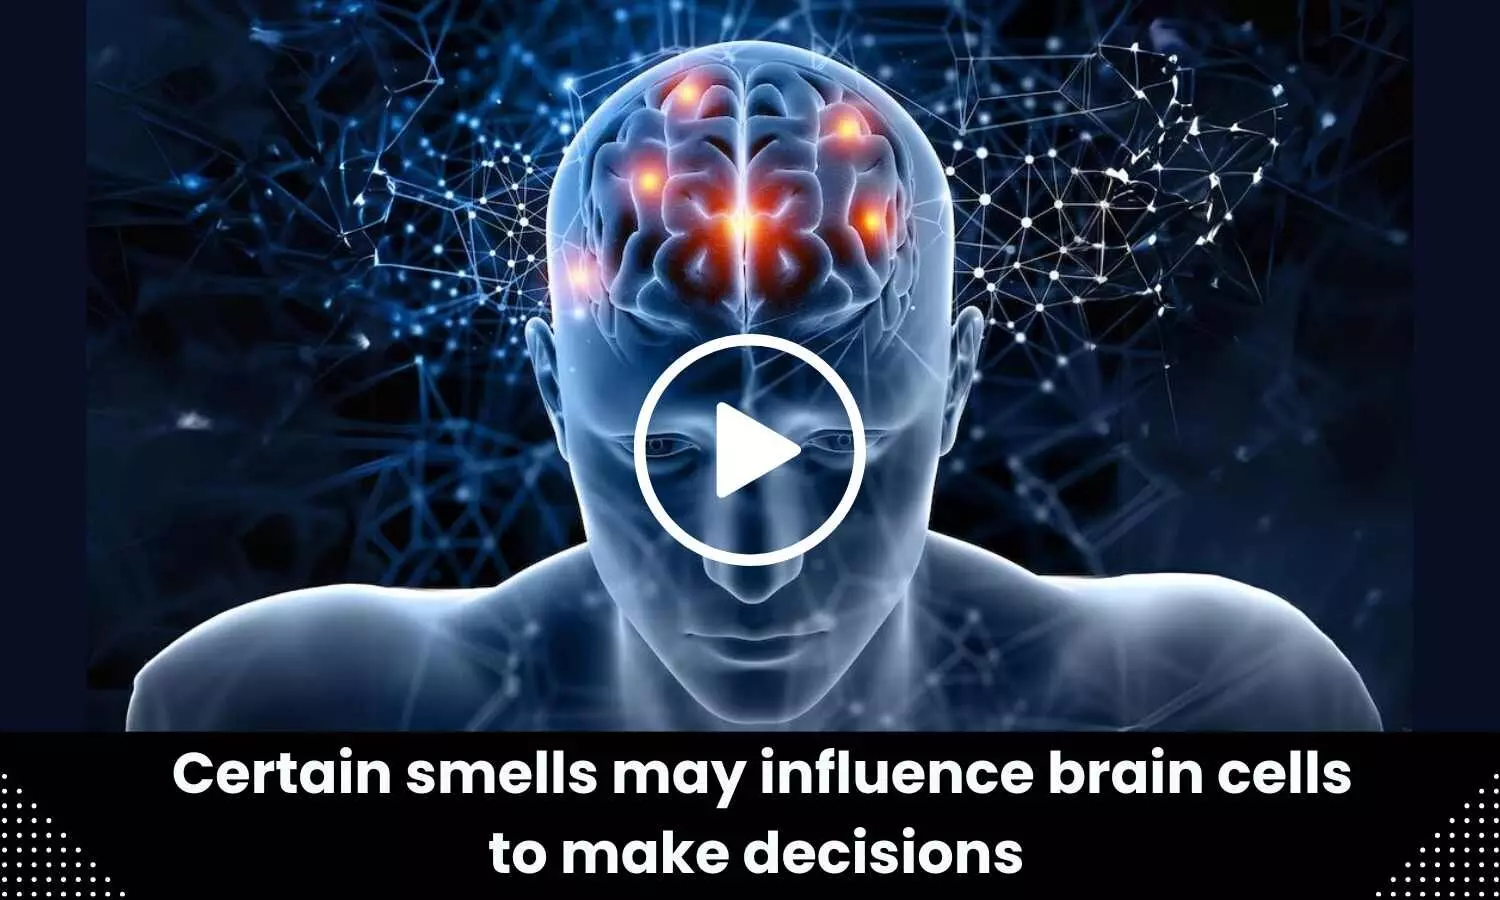 Certain smells may influence brain cells to make decisions